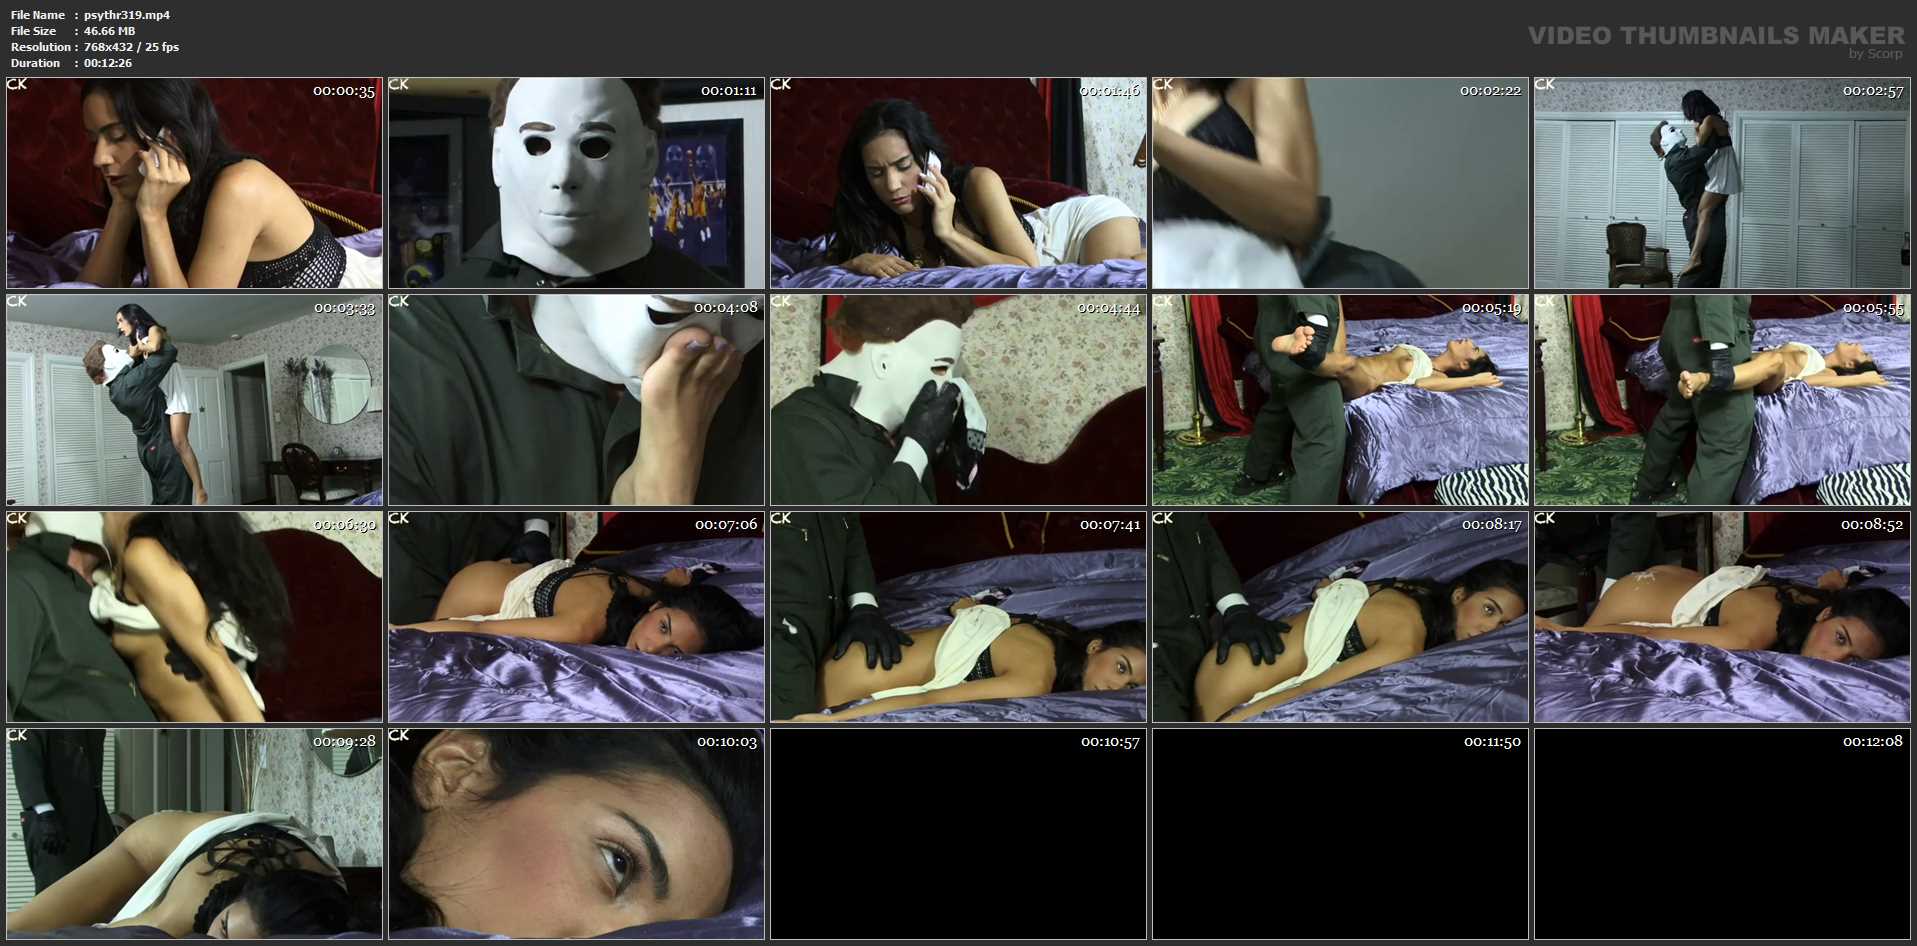 [PSYCHO-THRILLERS] HALLOWEEN SHARED KINSHIP. Featuring: TIA CYRUS, ANTHONY [SD][432p][MP4]